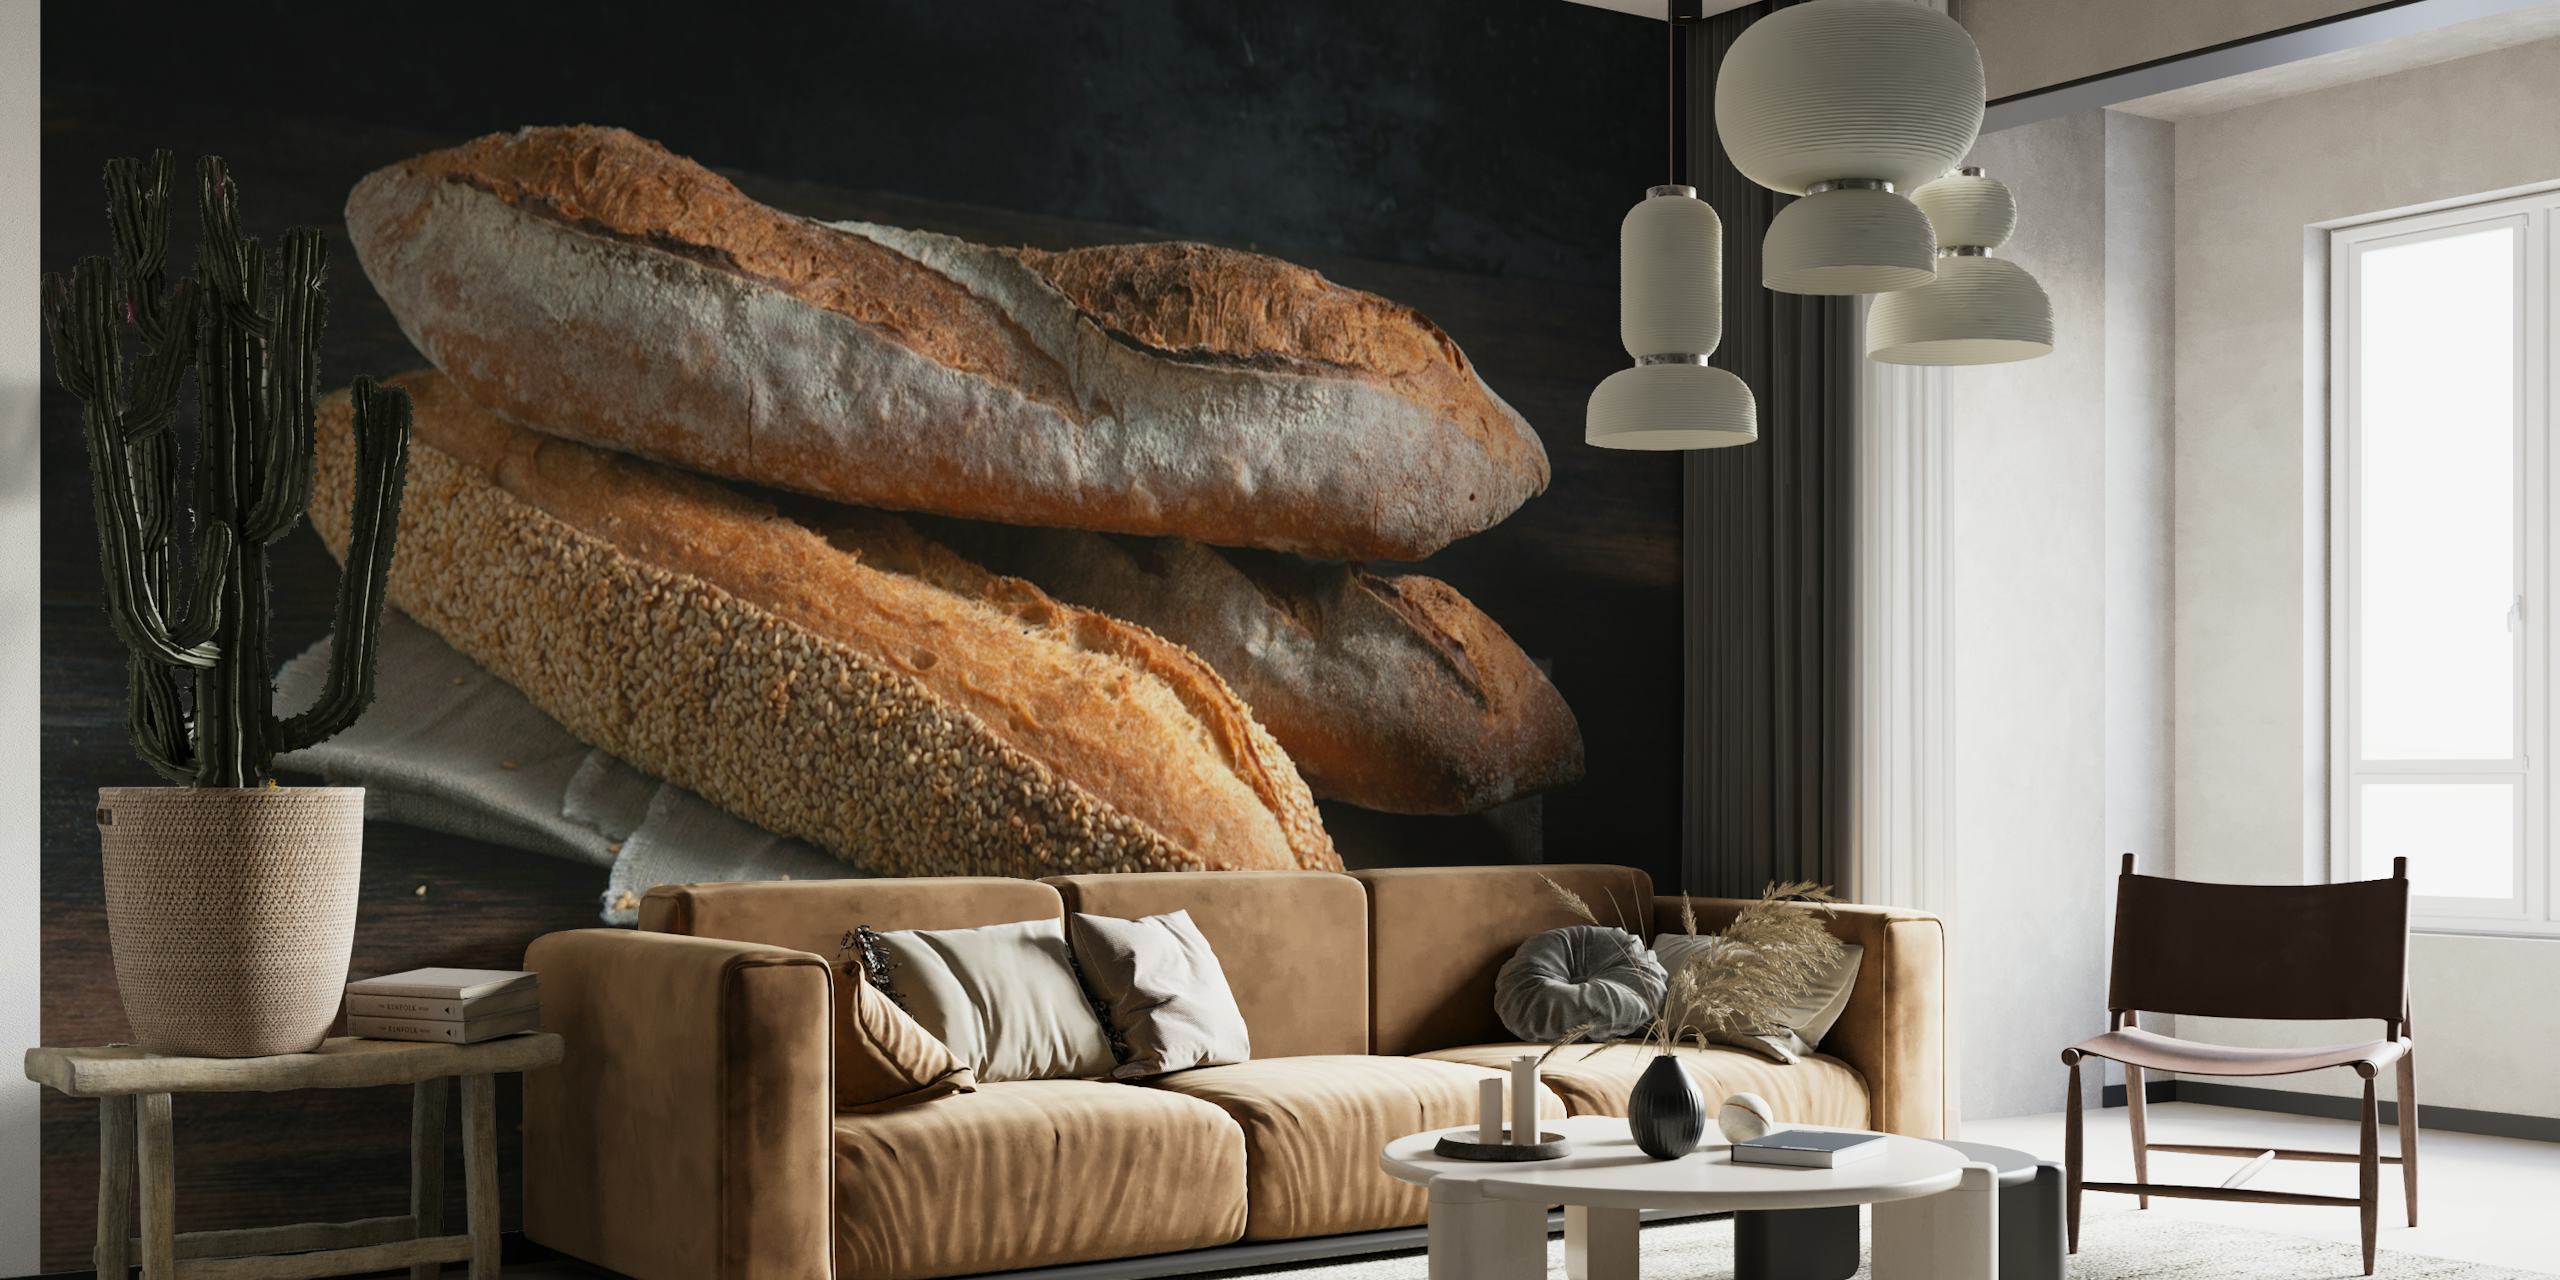 French baguettes behang